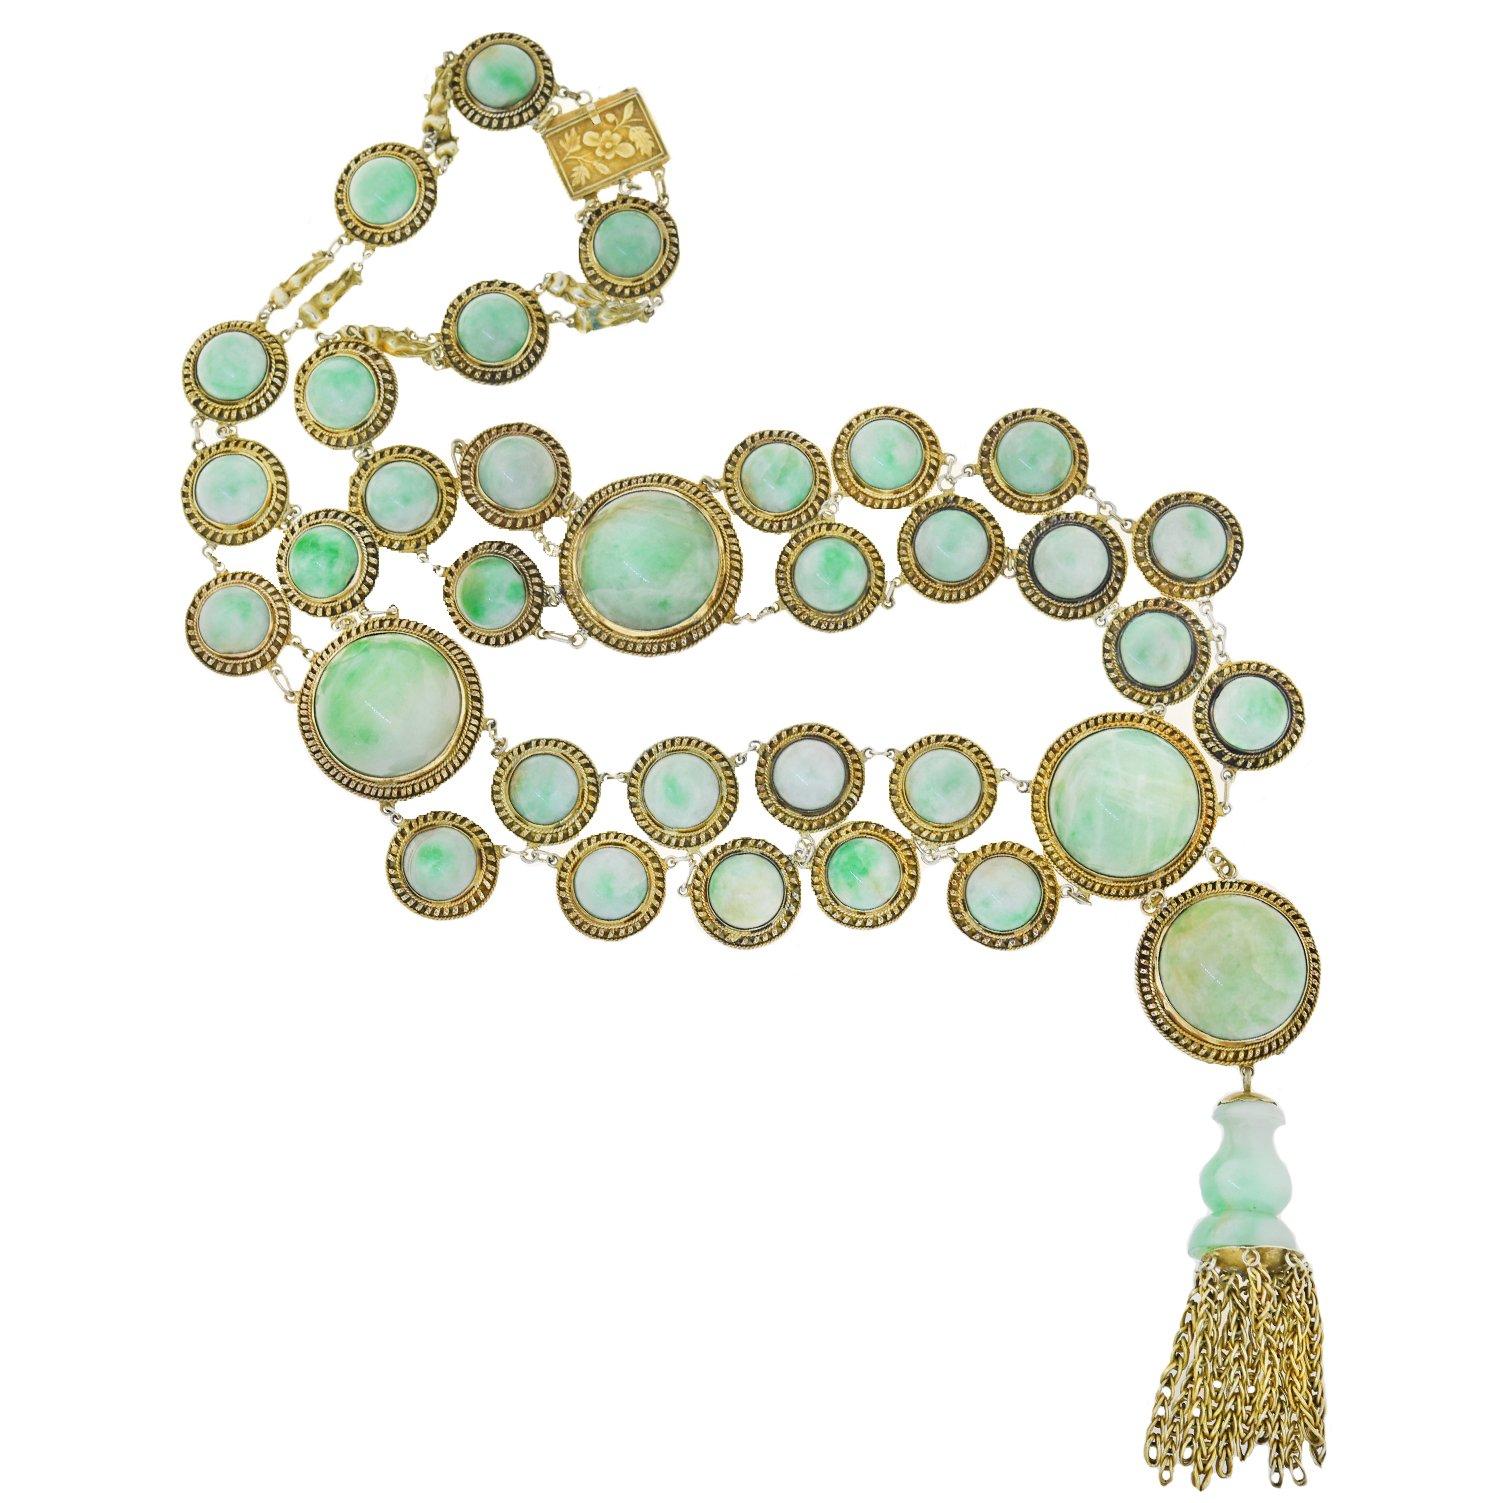 A stunning jade necklace from the Art Deco (ca1920s) era! This beautiful and bold piece is crafted in gilded sterling silver and comprised of incredible jade cabochon links that rest dramatically along the neckline. A wonderful reflection of its